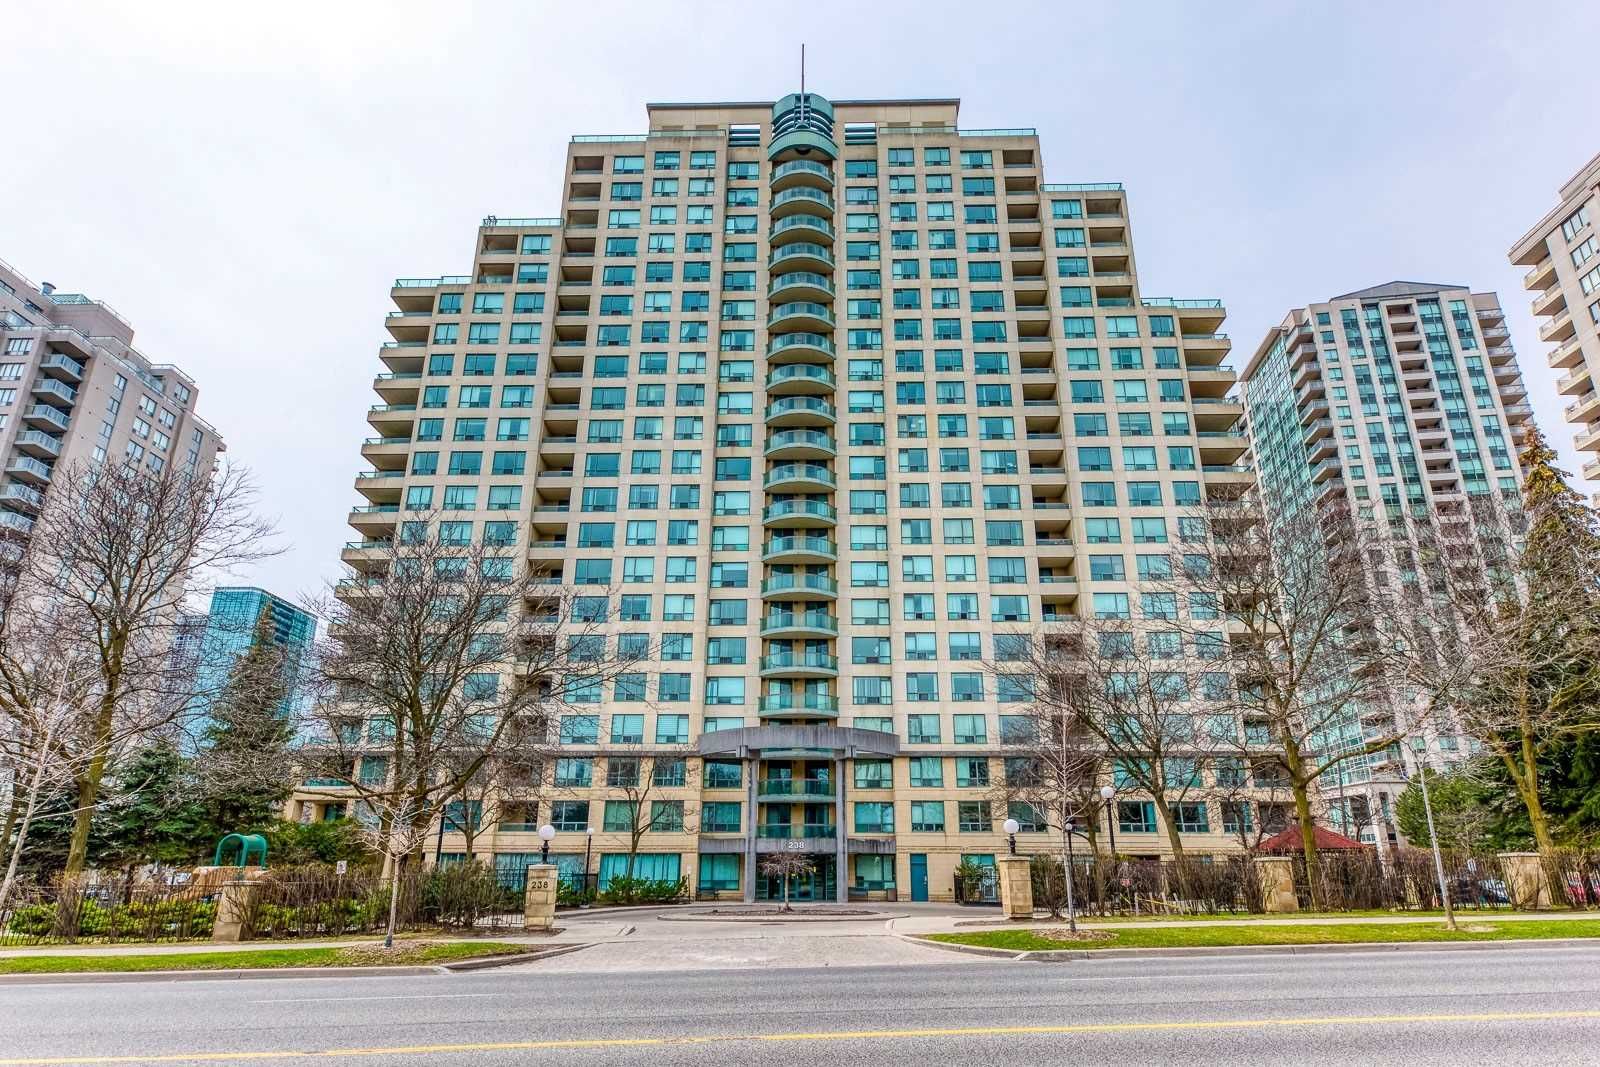 238 Doris Ave. This condo at Kingsdale Condos is located in  North York, Toronto - image #1 of 2 by Strata.ca